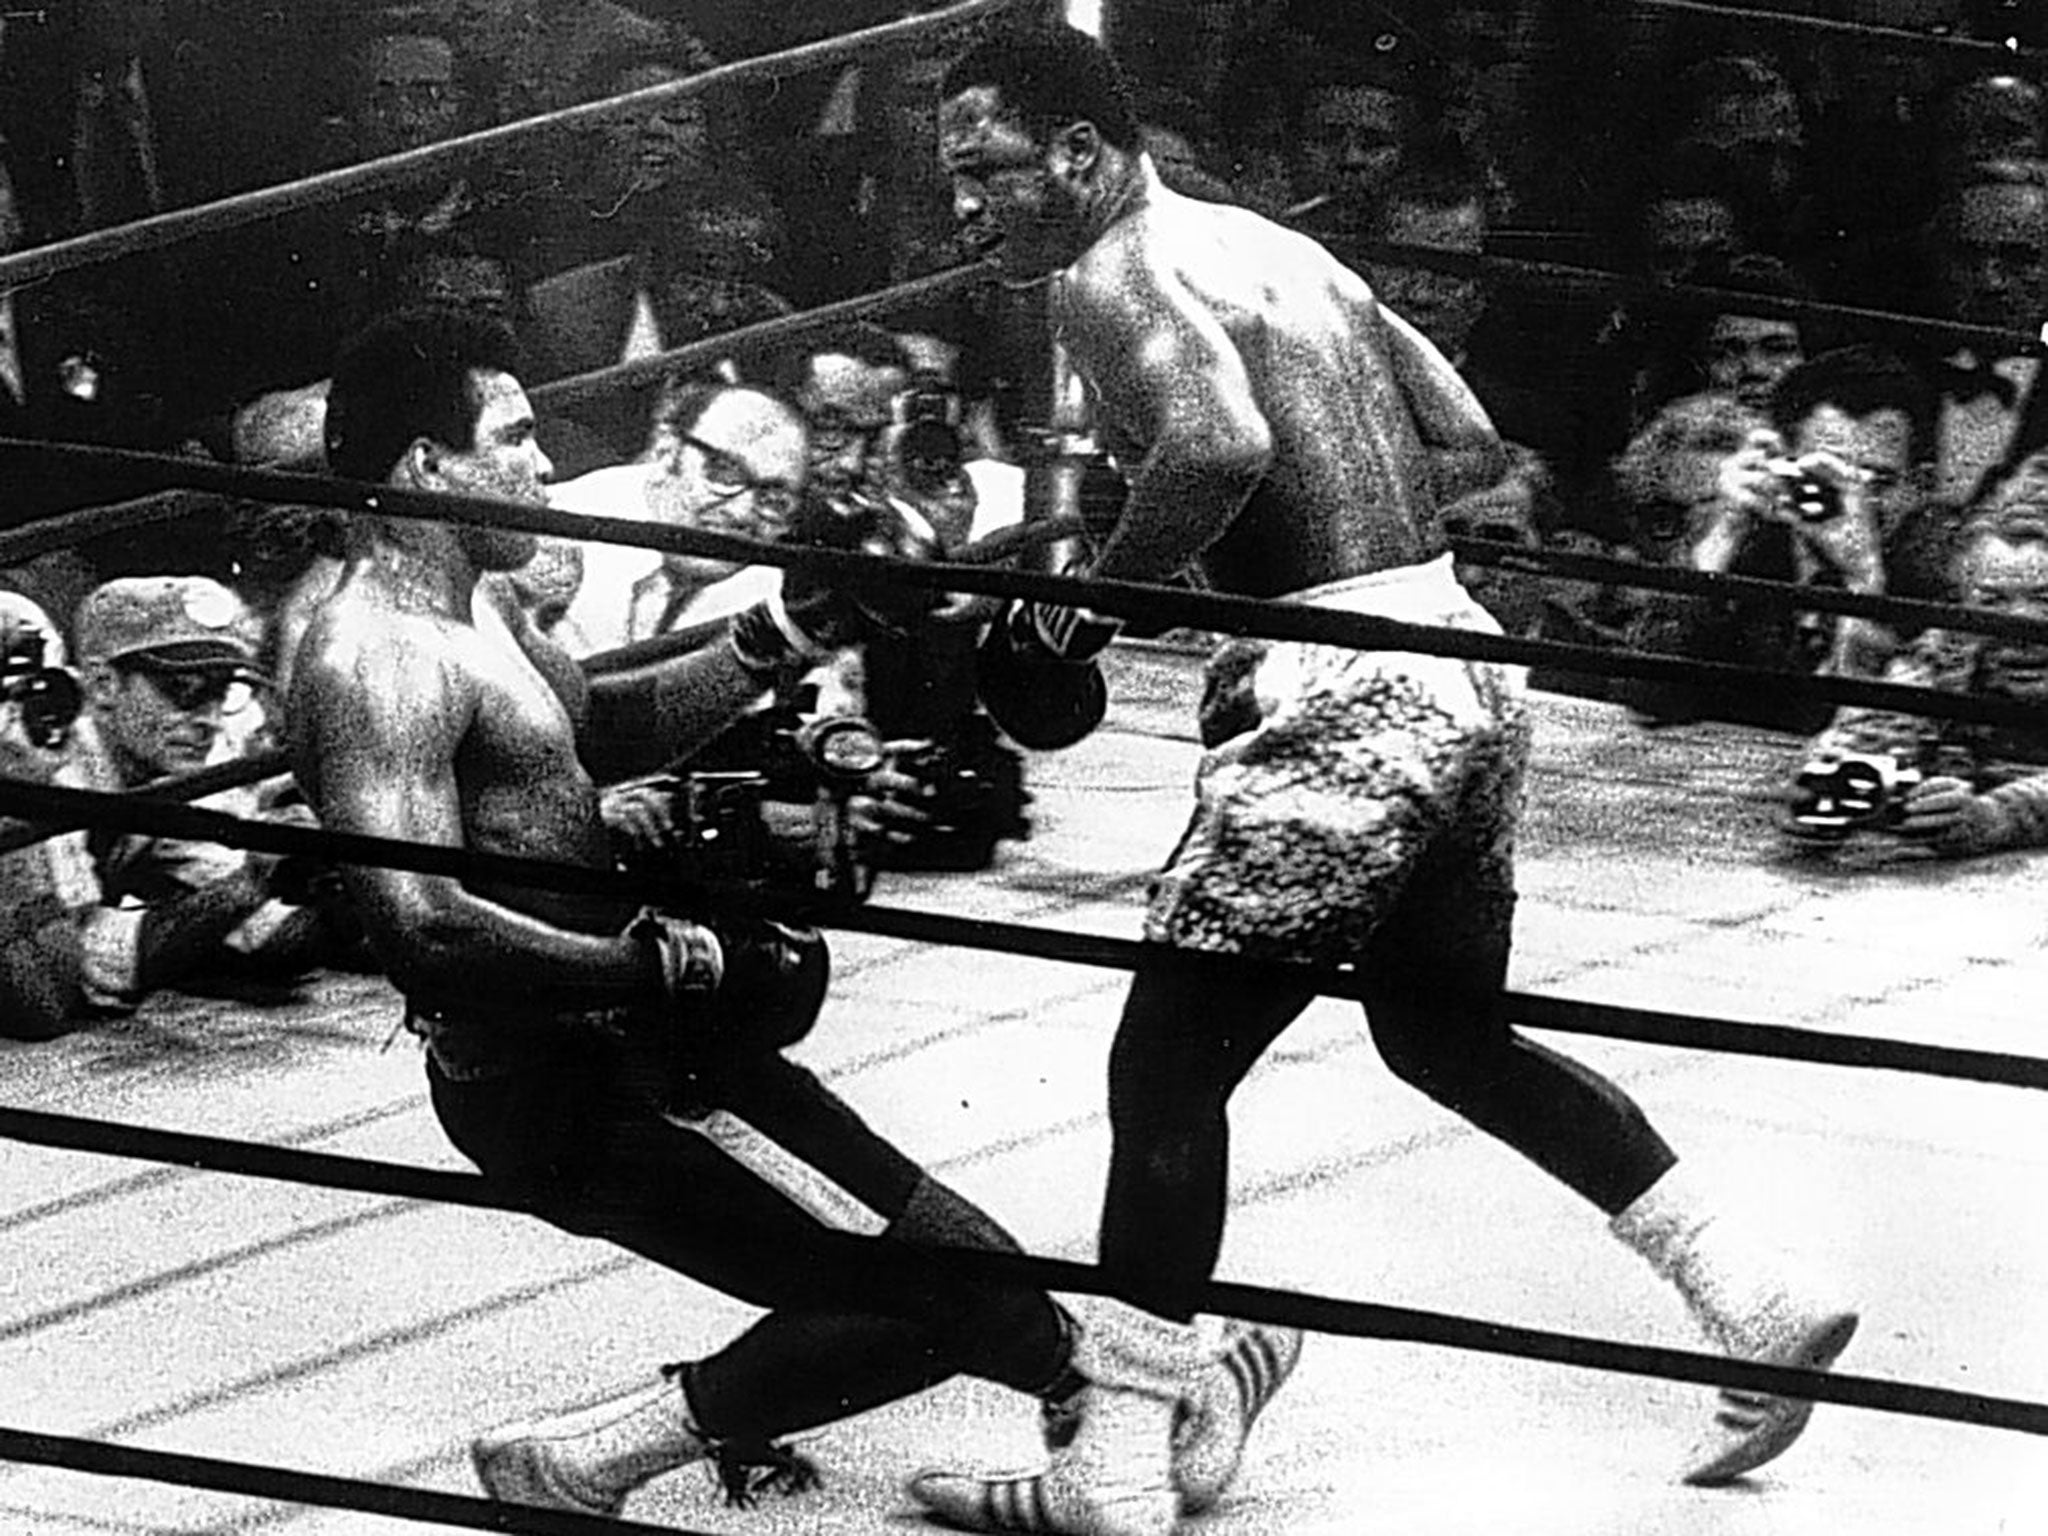 Muhammad Ali goes down in the 15th round against Joe Frazier during their epic encounter in 1971 at Madison Square Garden in New York, often now dubbed the fight of the century